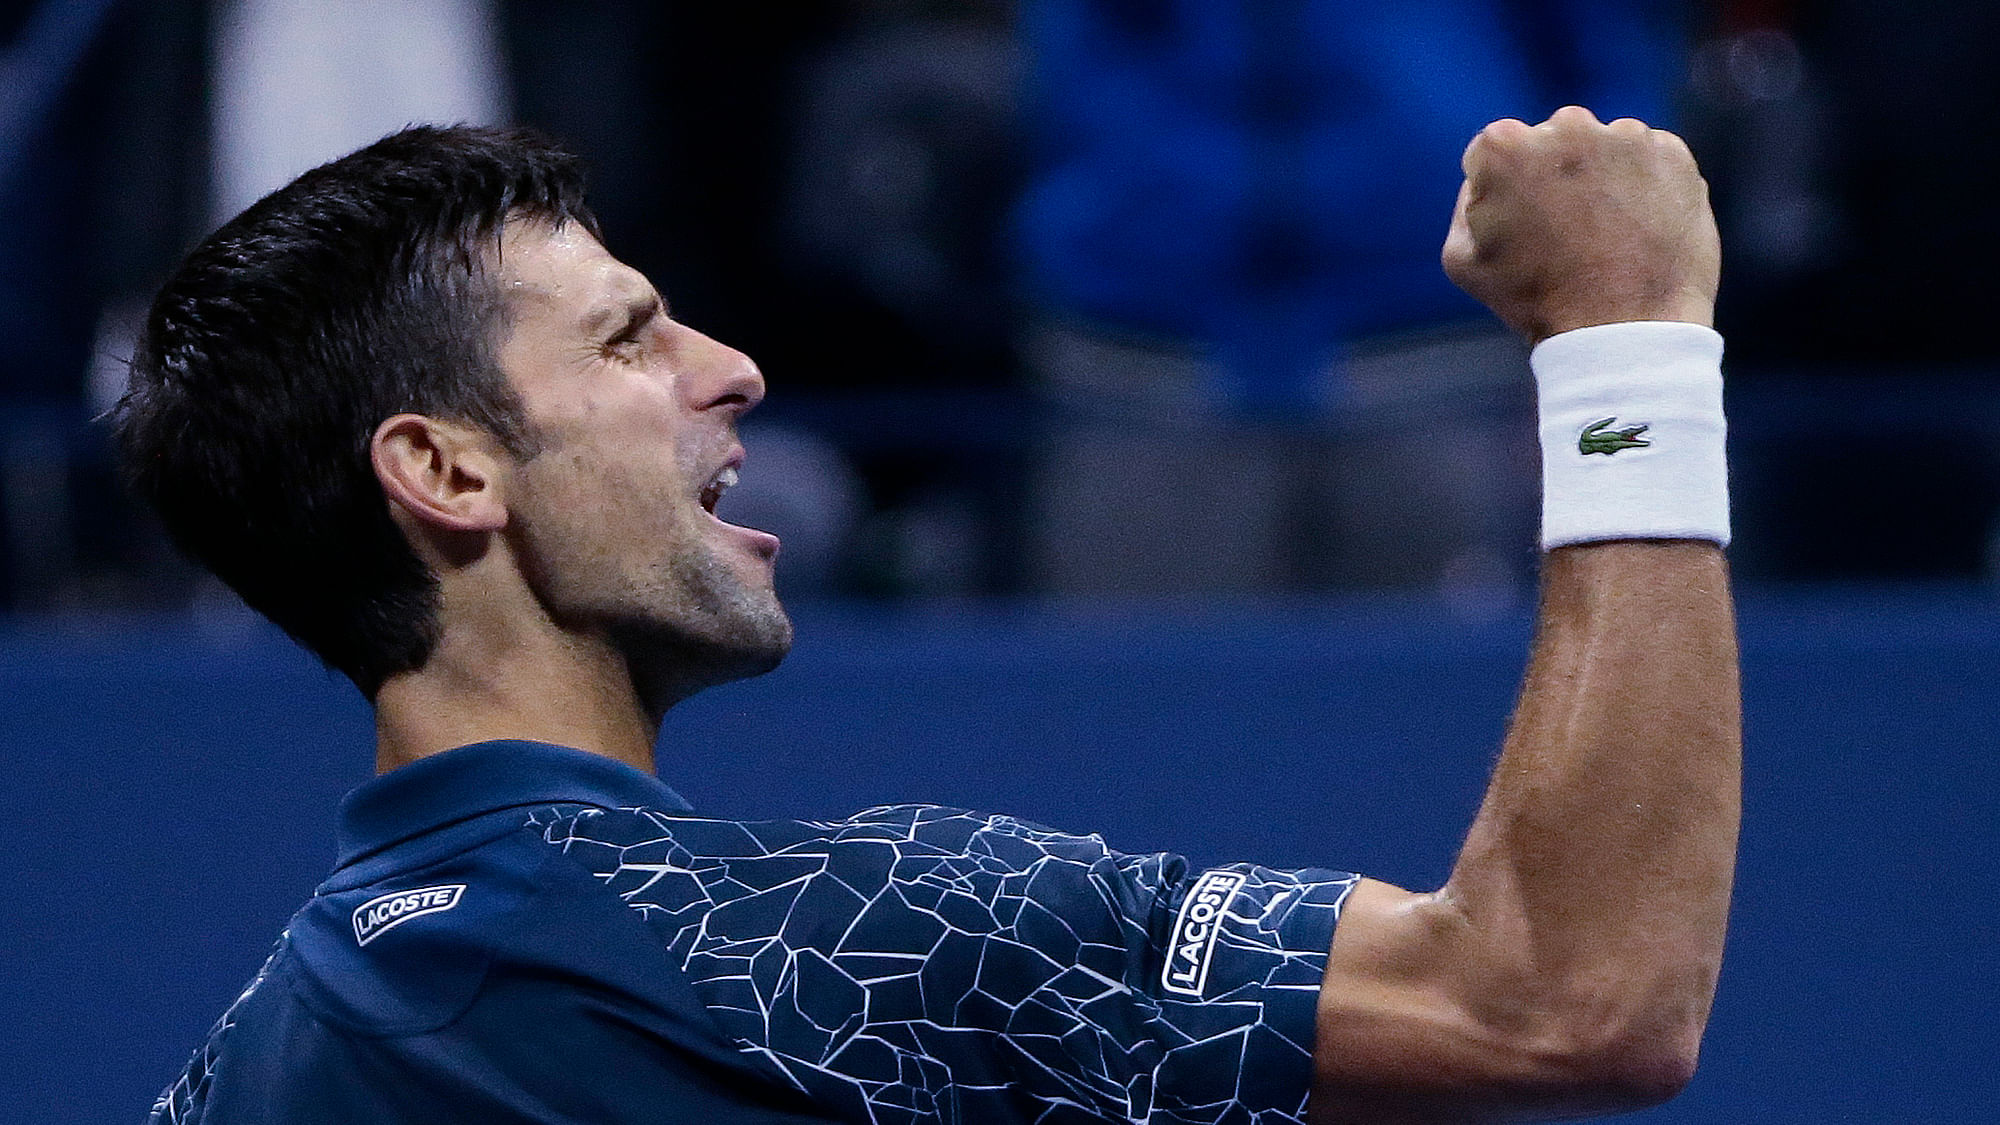 Novak Djokovic, of Serbia, celebrates after defeating Kei Nishikori, of Japan, during the semifinals of the U.S. Open tennis tournament, Friday, Sept. 7, 2018, in New York.&nbsp;